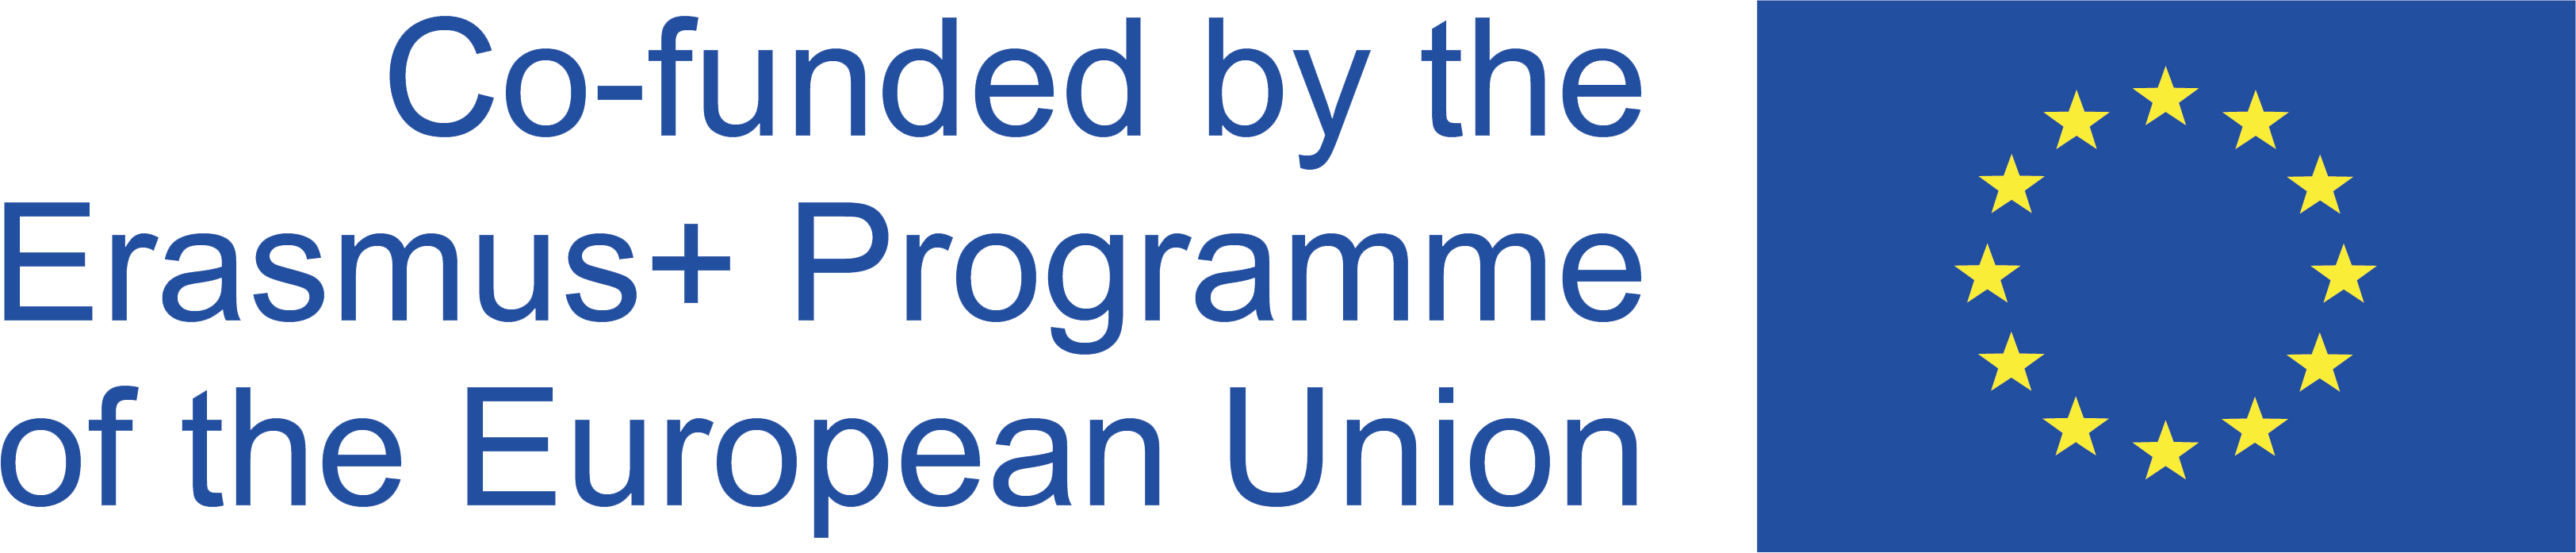 Co-funded by the Erasmus+ Programme of the Europian Union